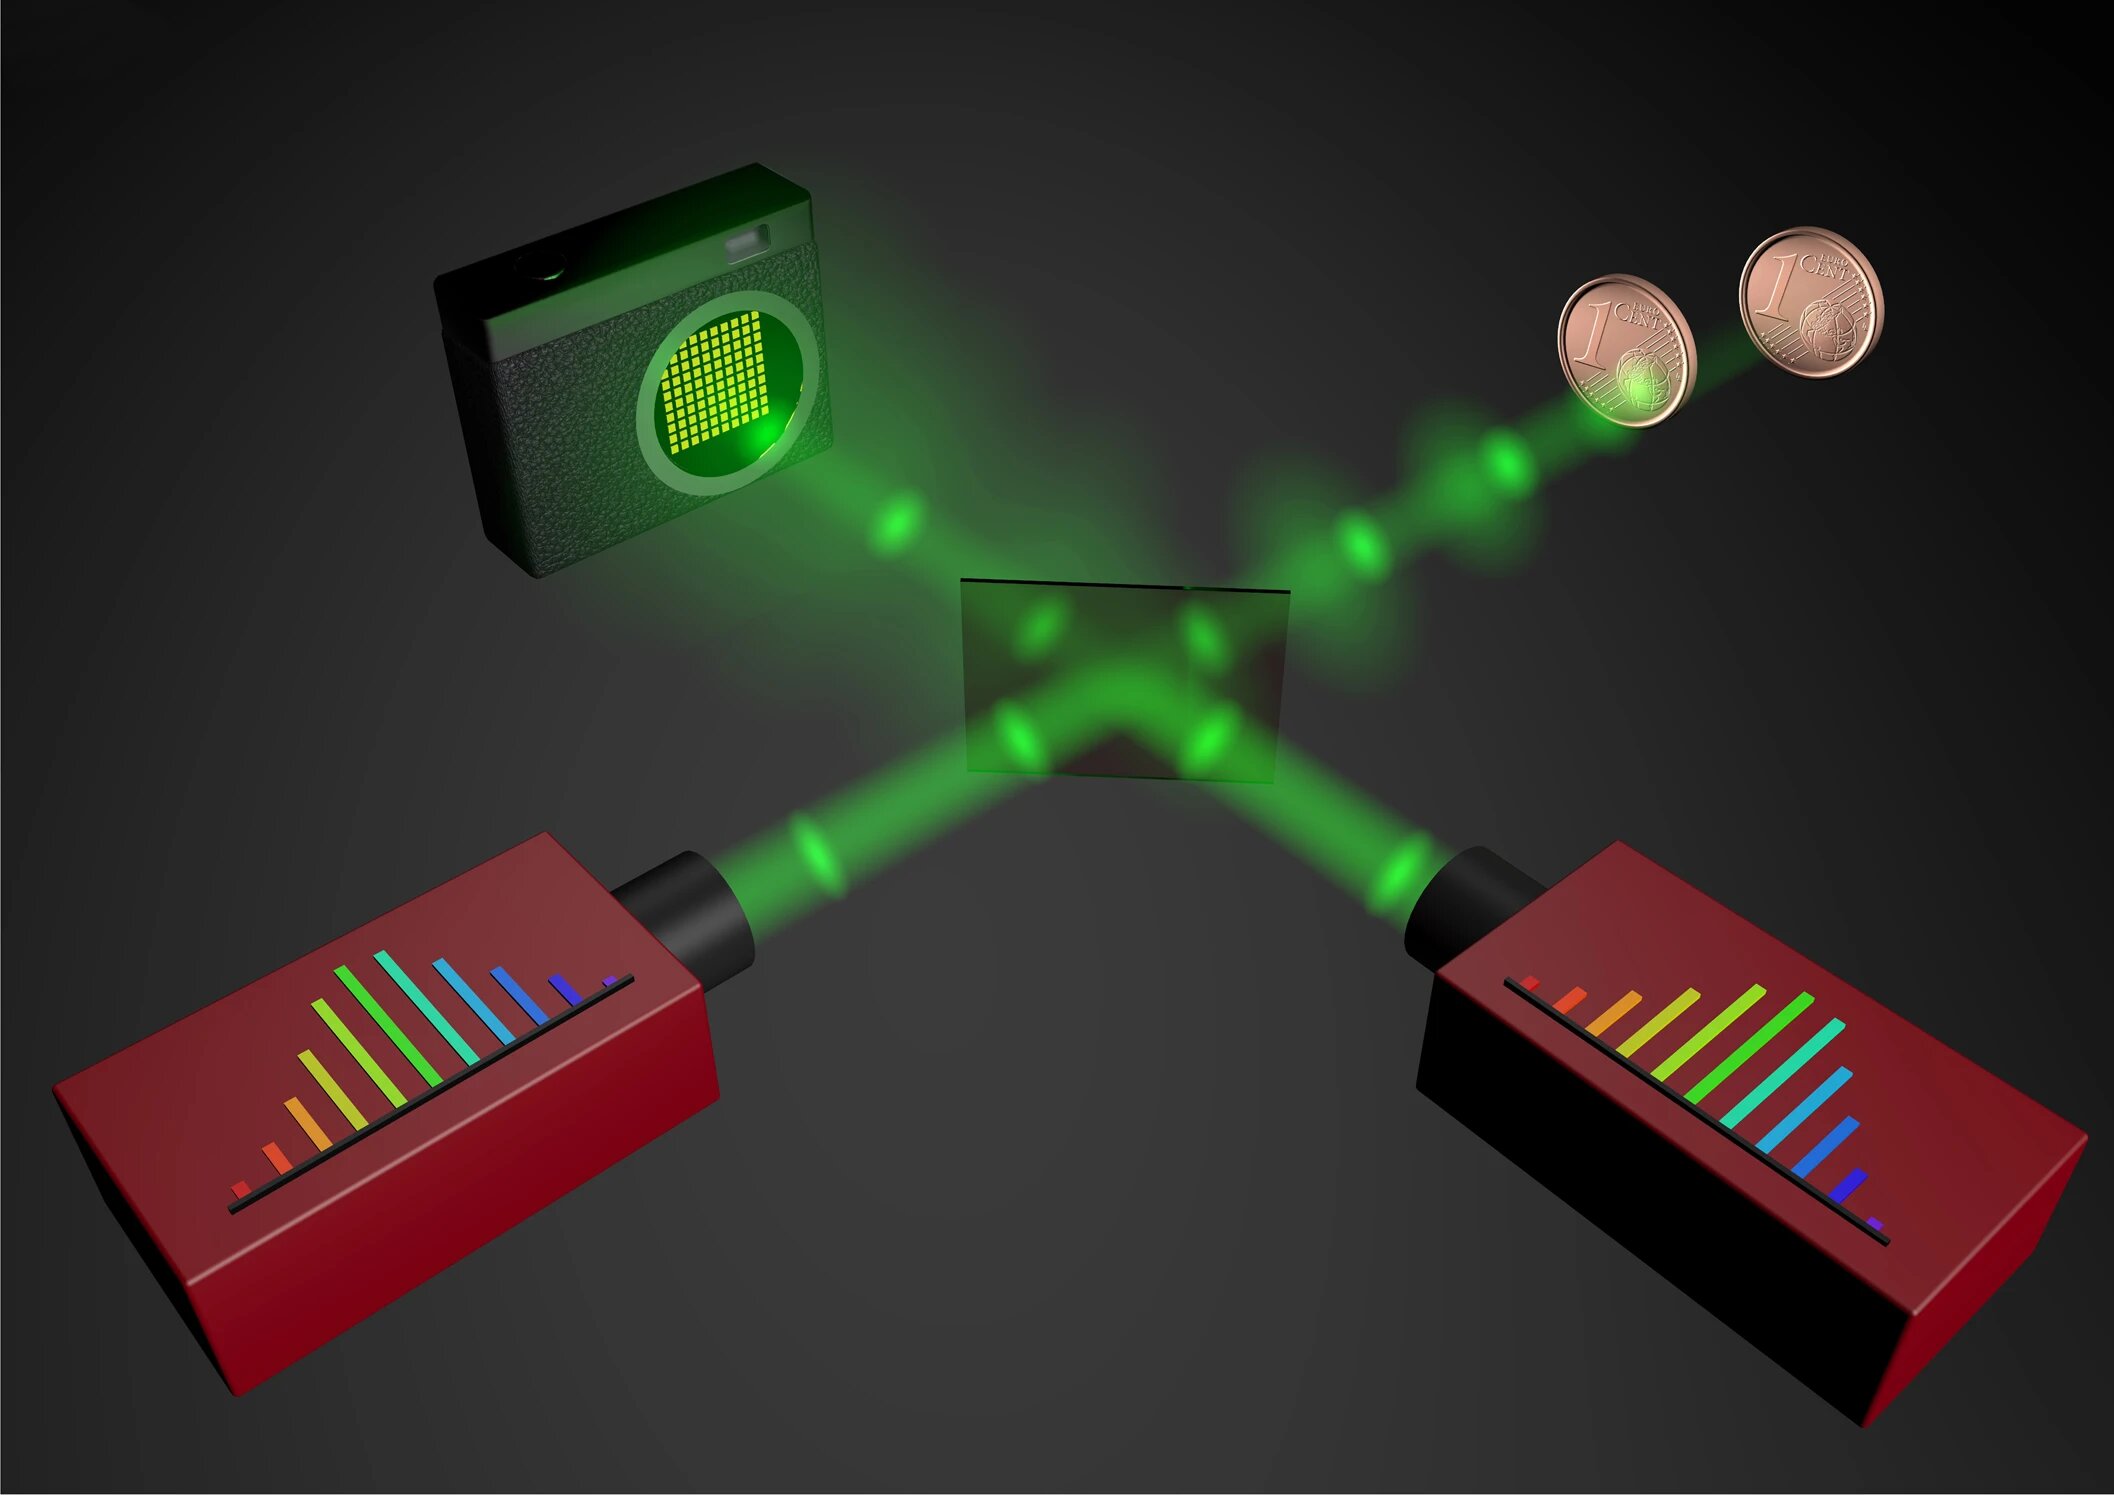 Three-dimensional imaging with optical frequency combs